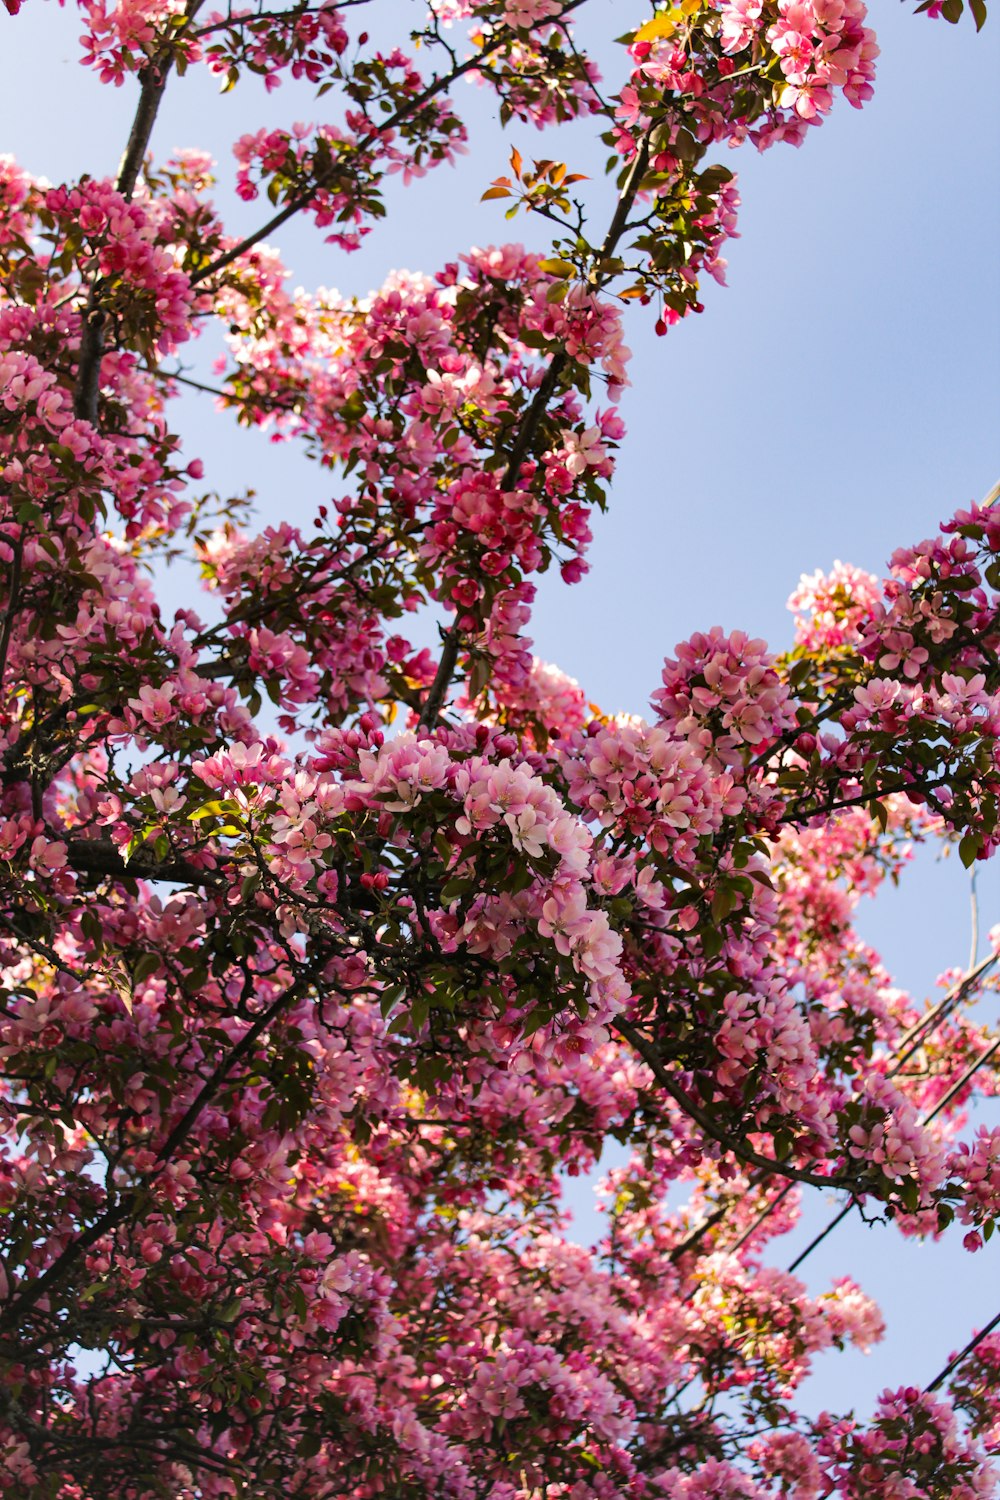 pink flowers on a tree with a blue sky in the background